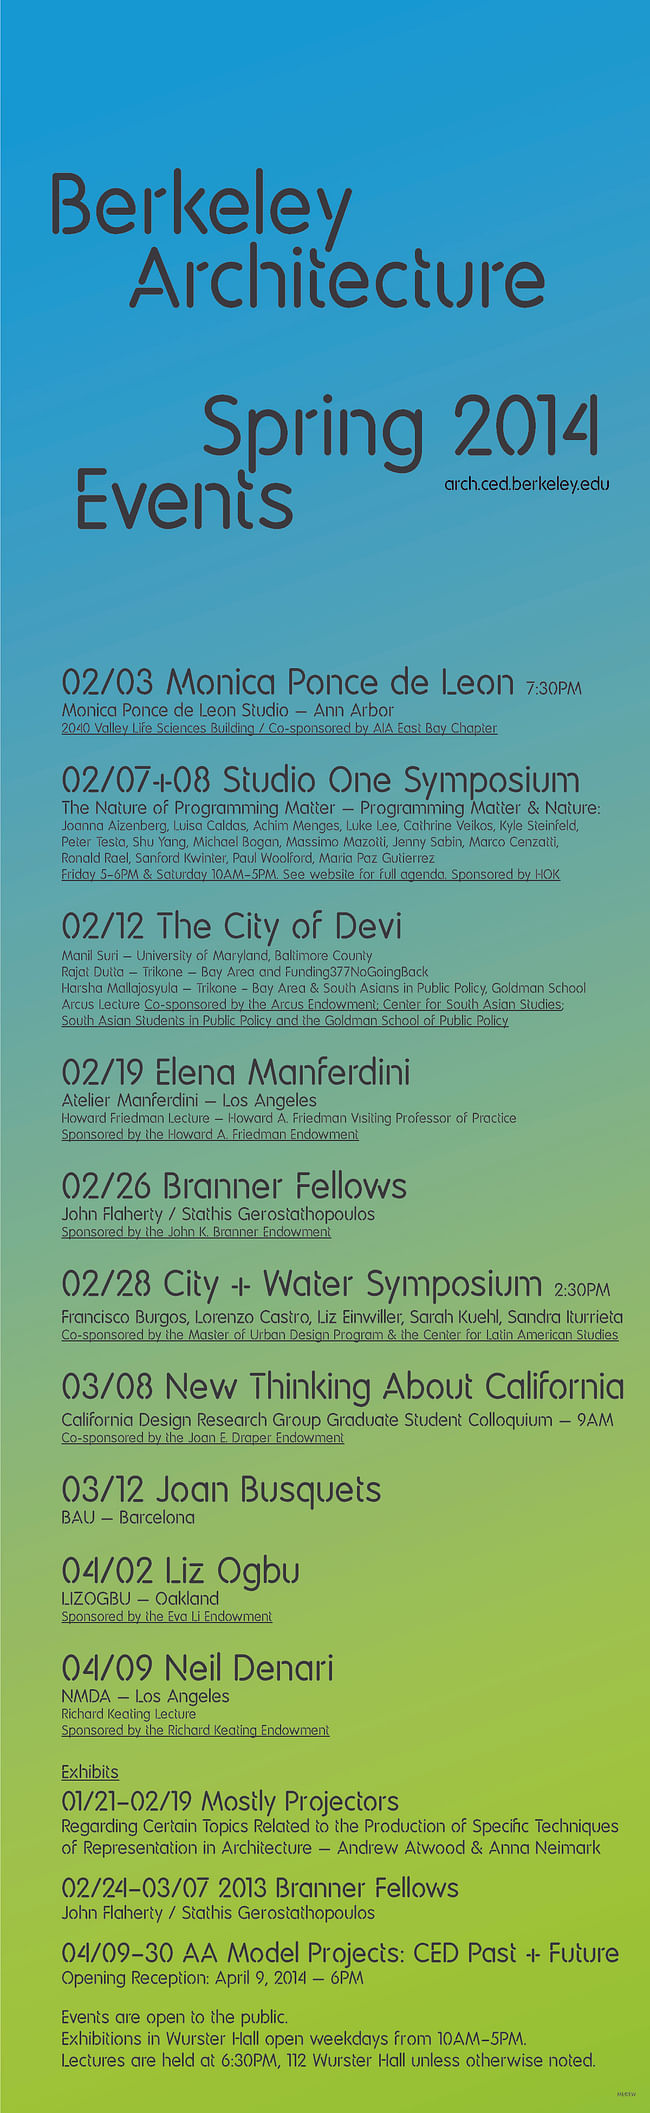 Enlarged version of UC Berkeley College of Environmental Design, Spring '14 lecture poster. Image courtesy of UC Berkeley CED.